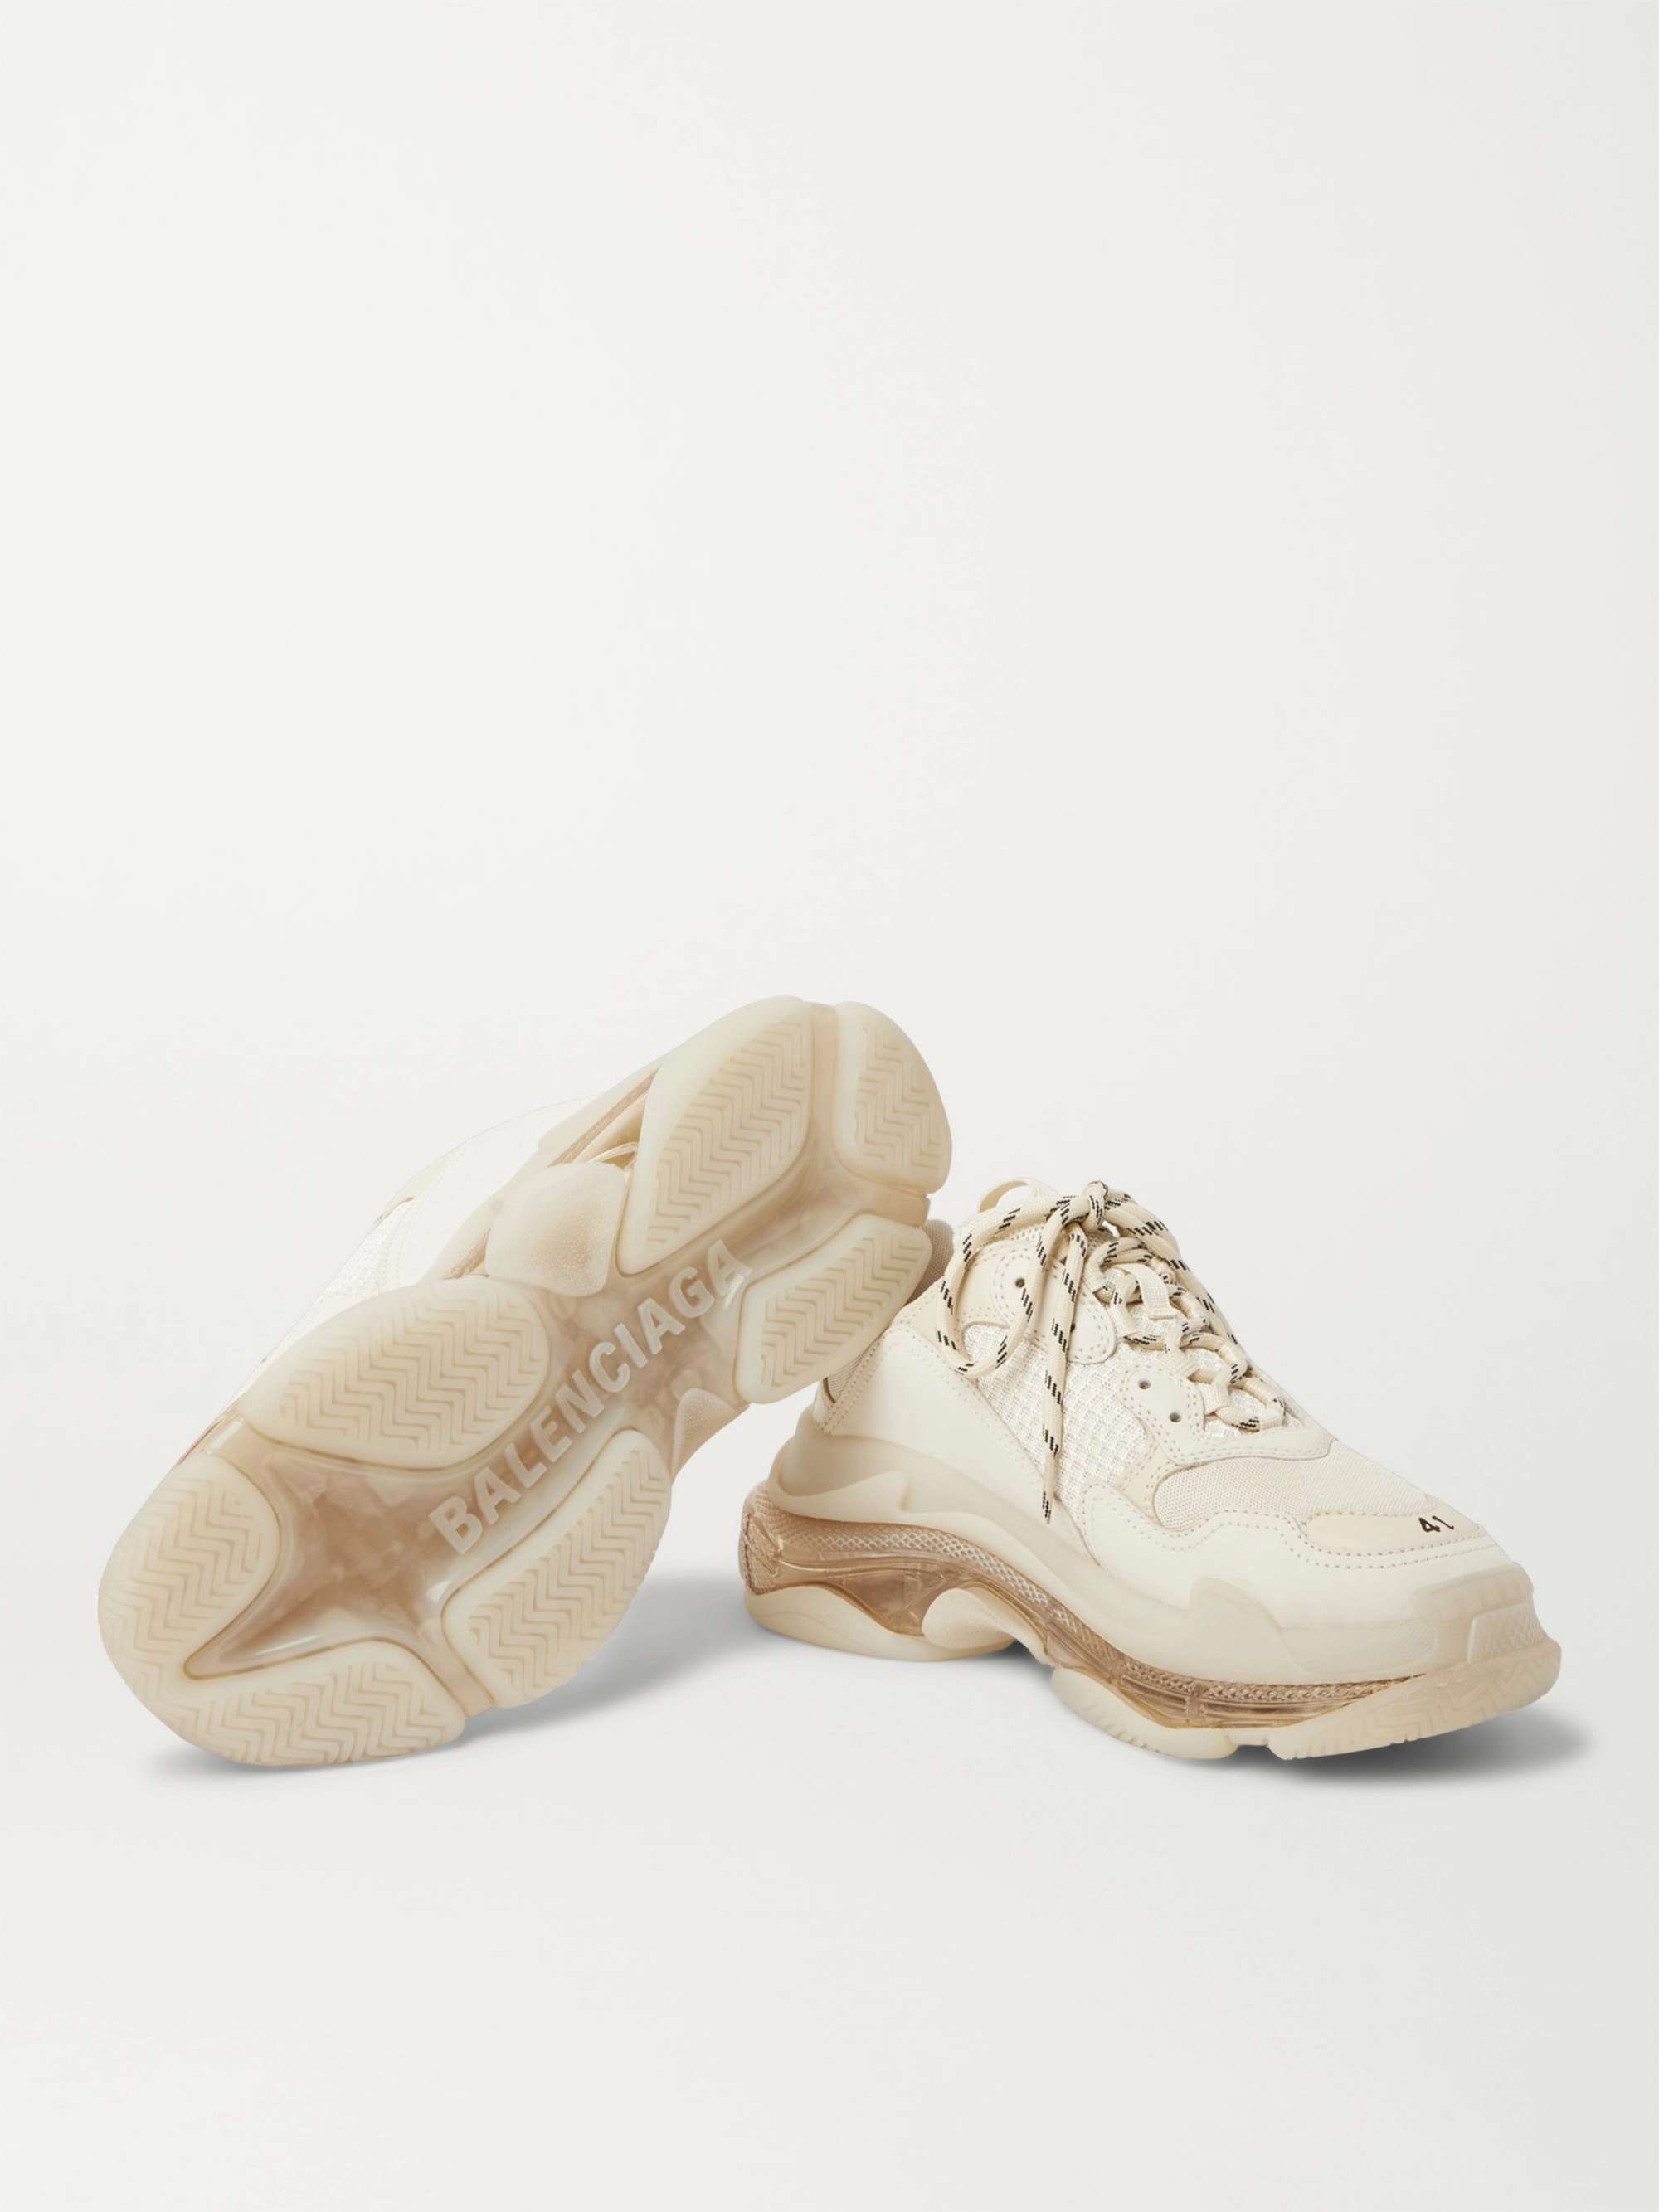 BALENCIAGA Triple S Clear Sole Mesh, Nubuck and Leather Sneakers